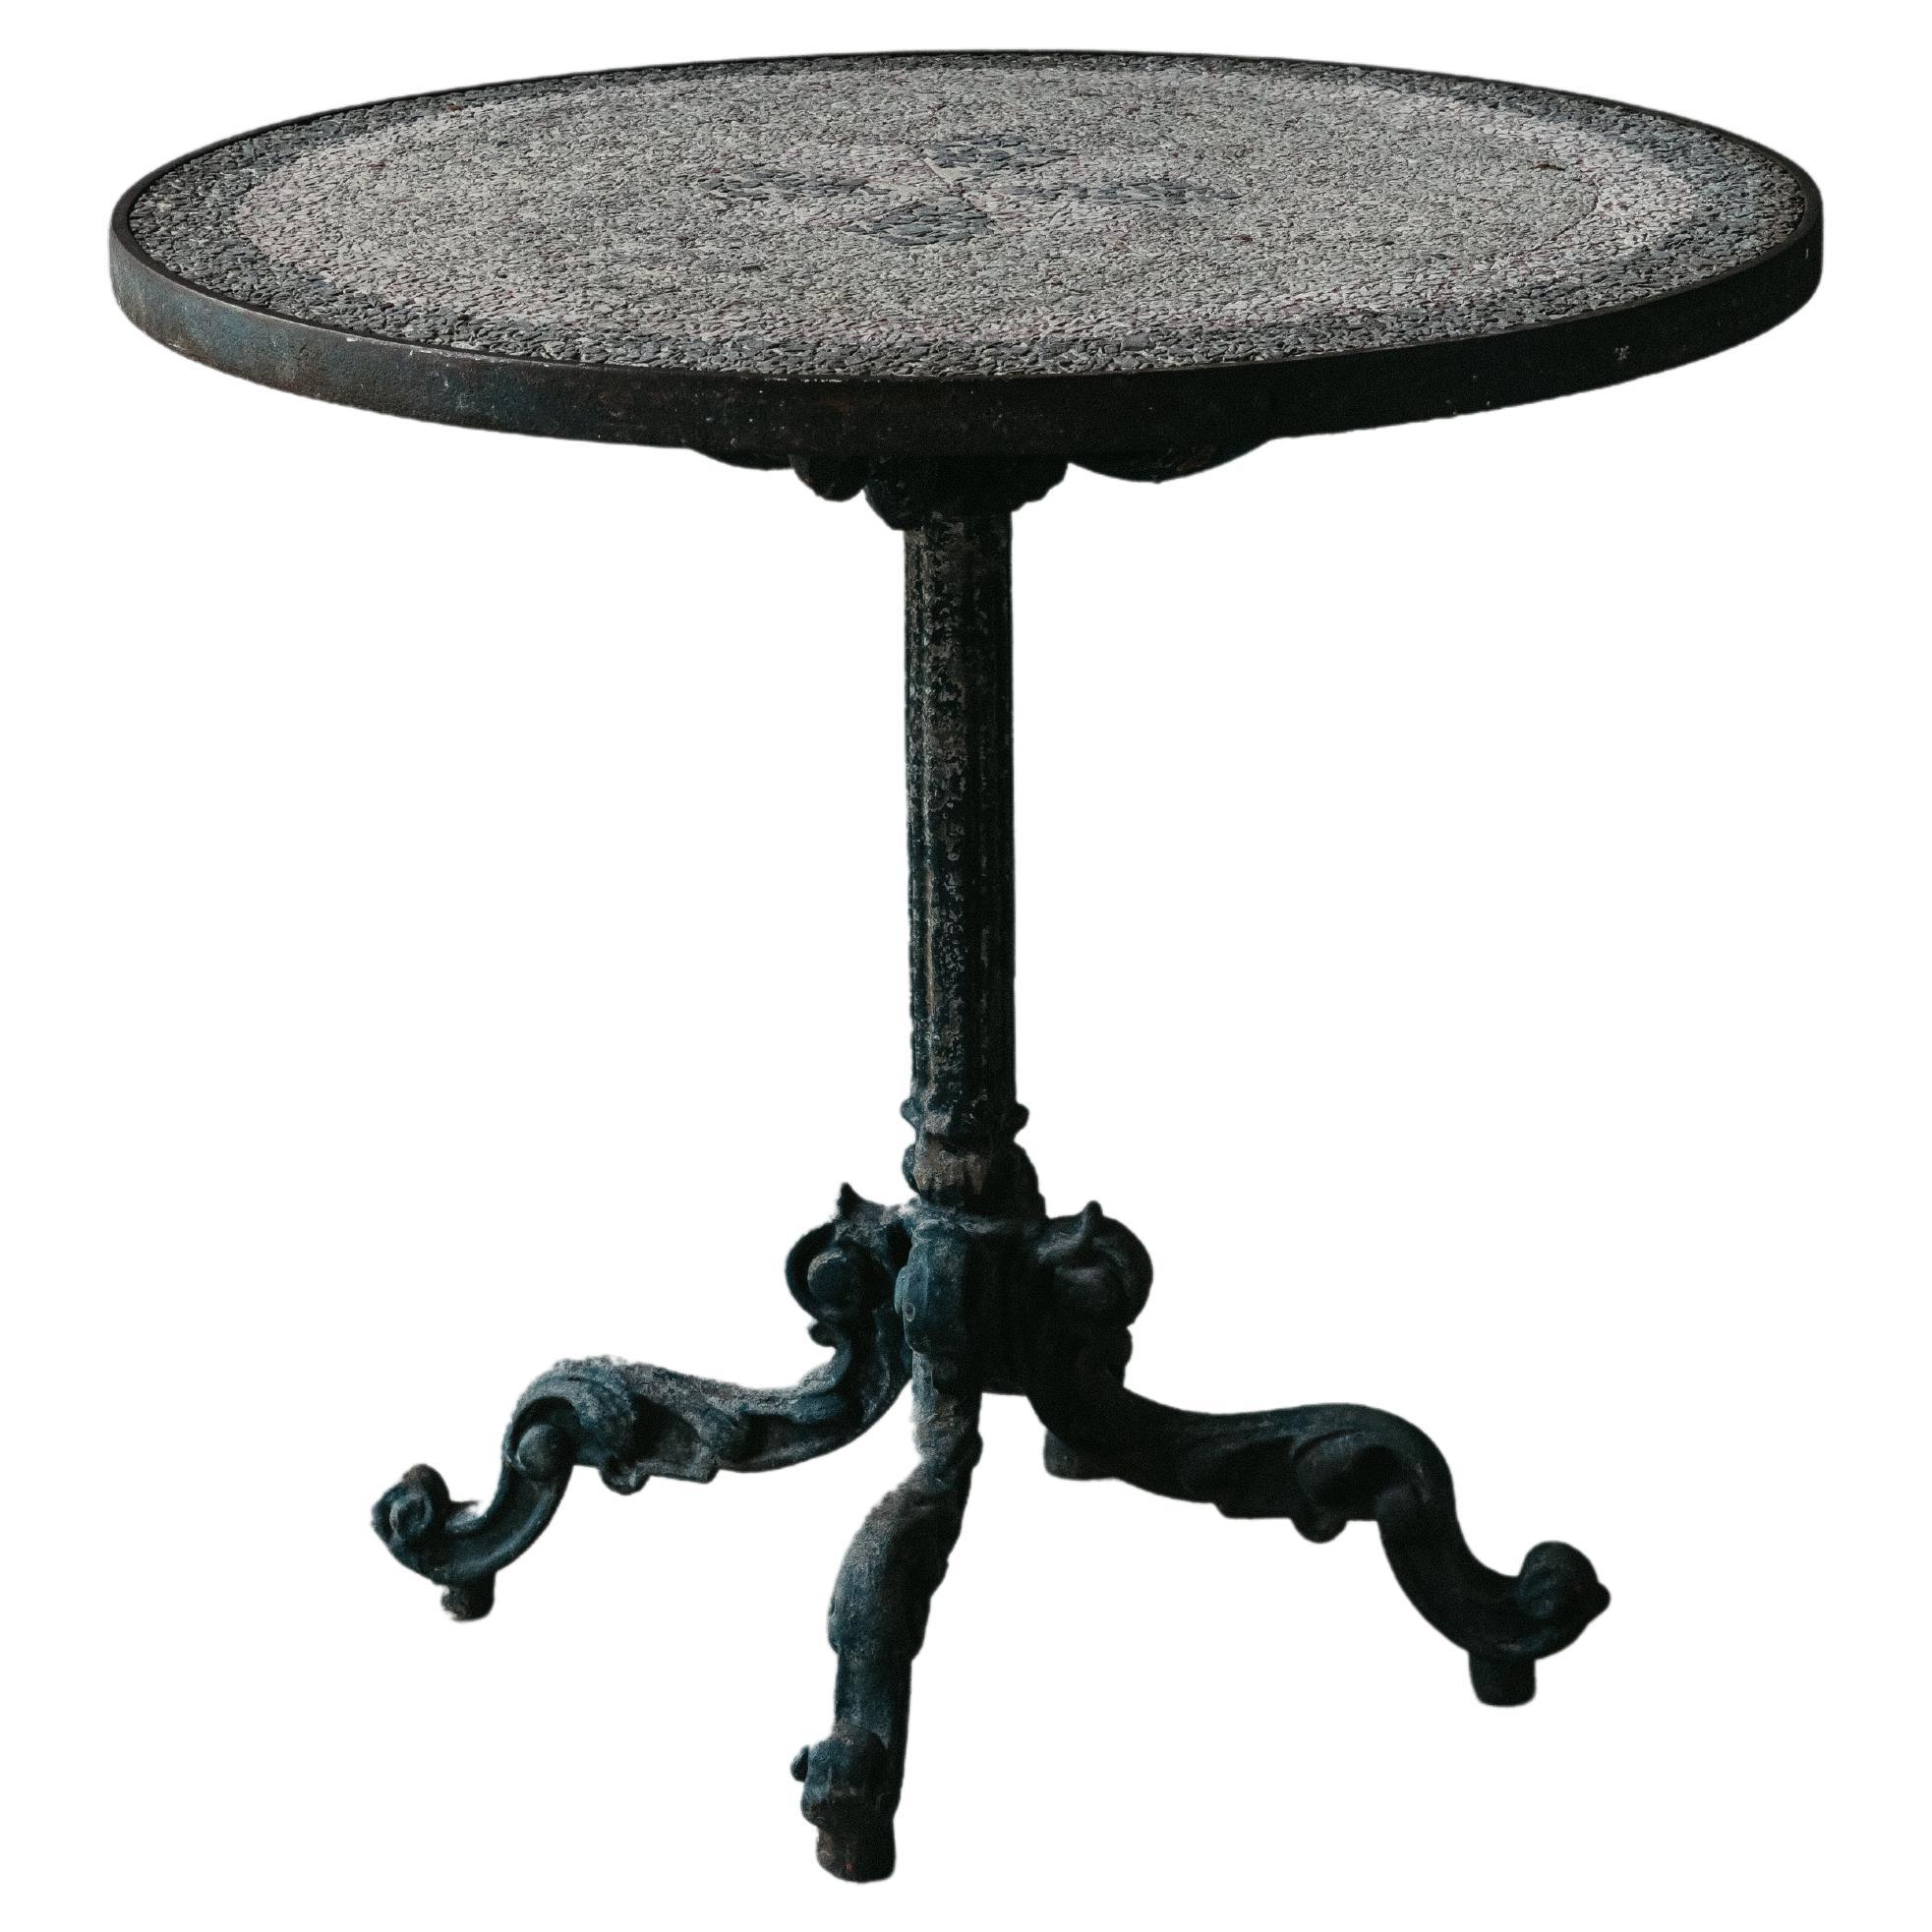 Early Cast Iron Garden Table From France, Circa 1930